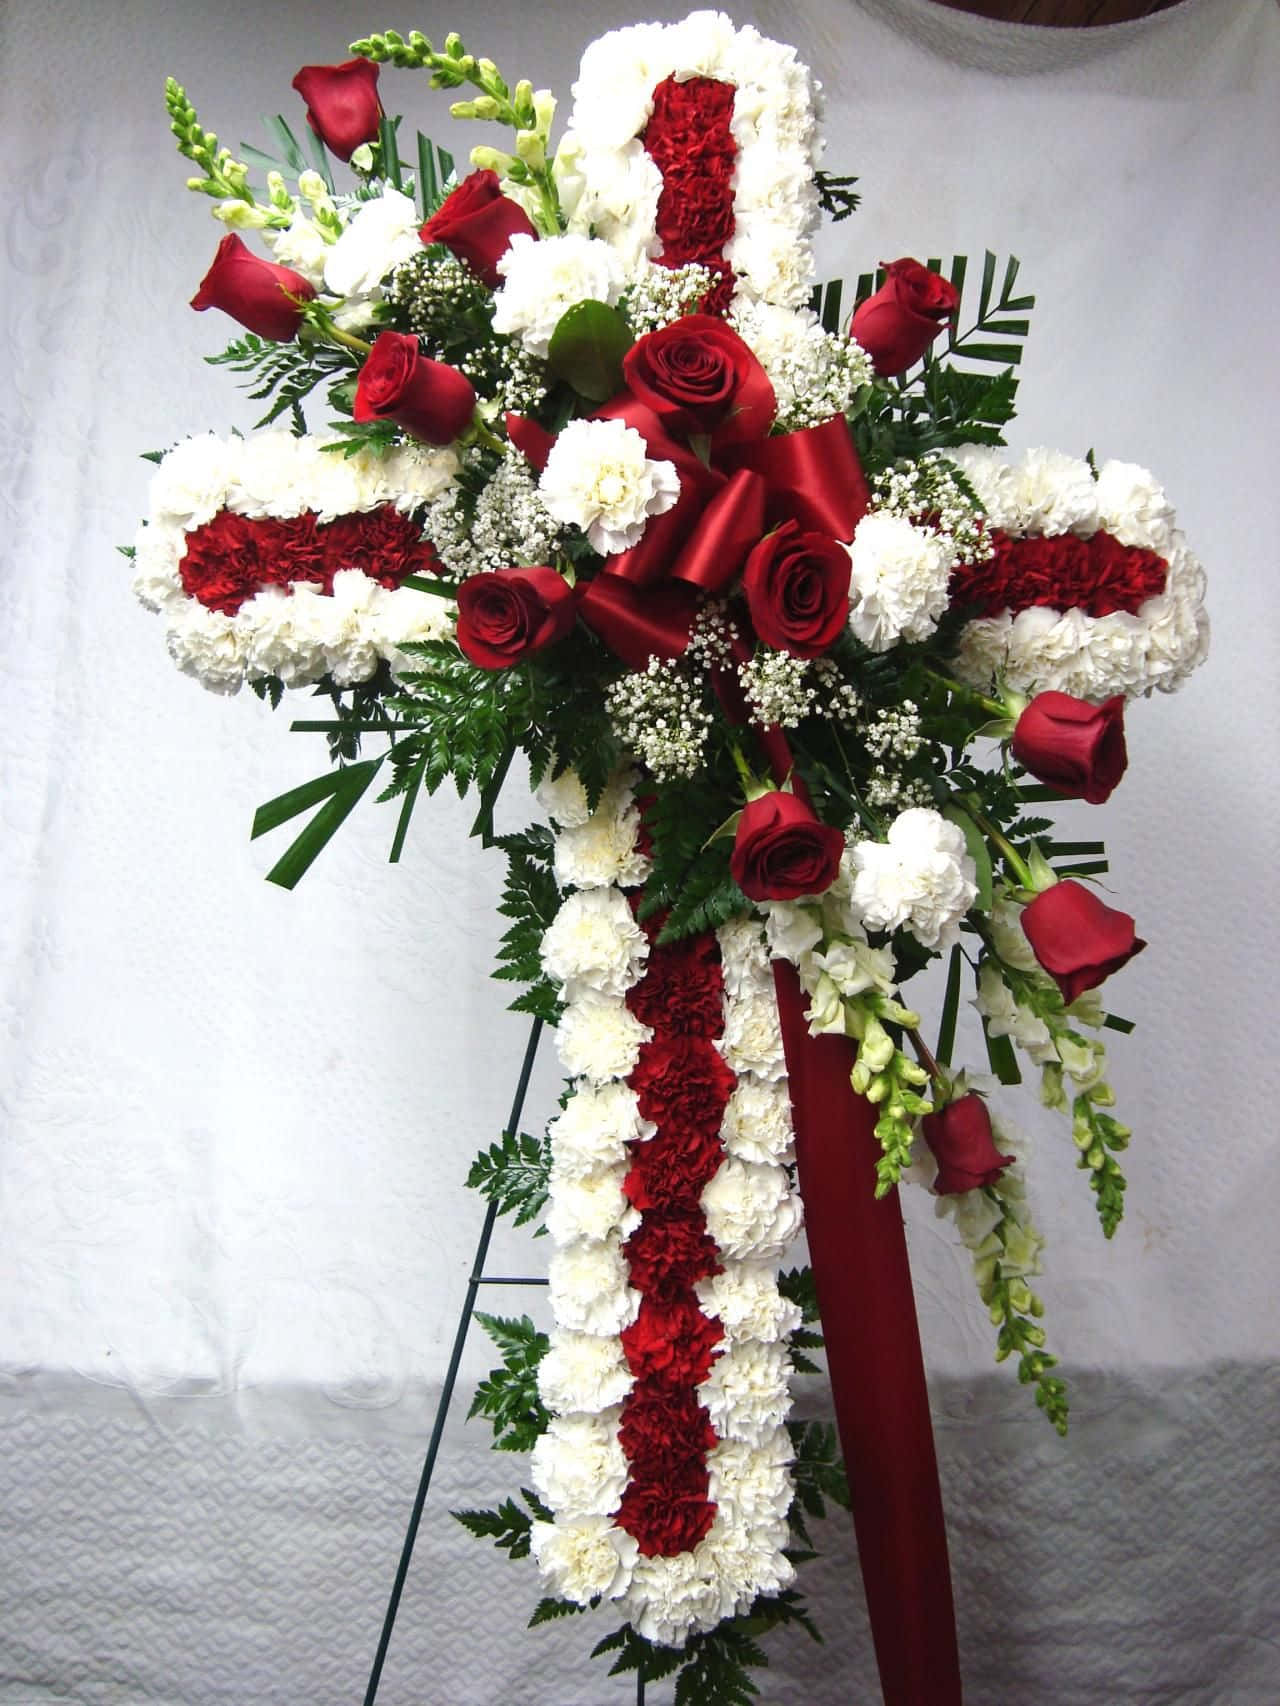 A Cross With Red And White Flowers